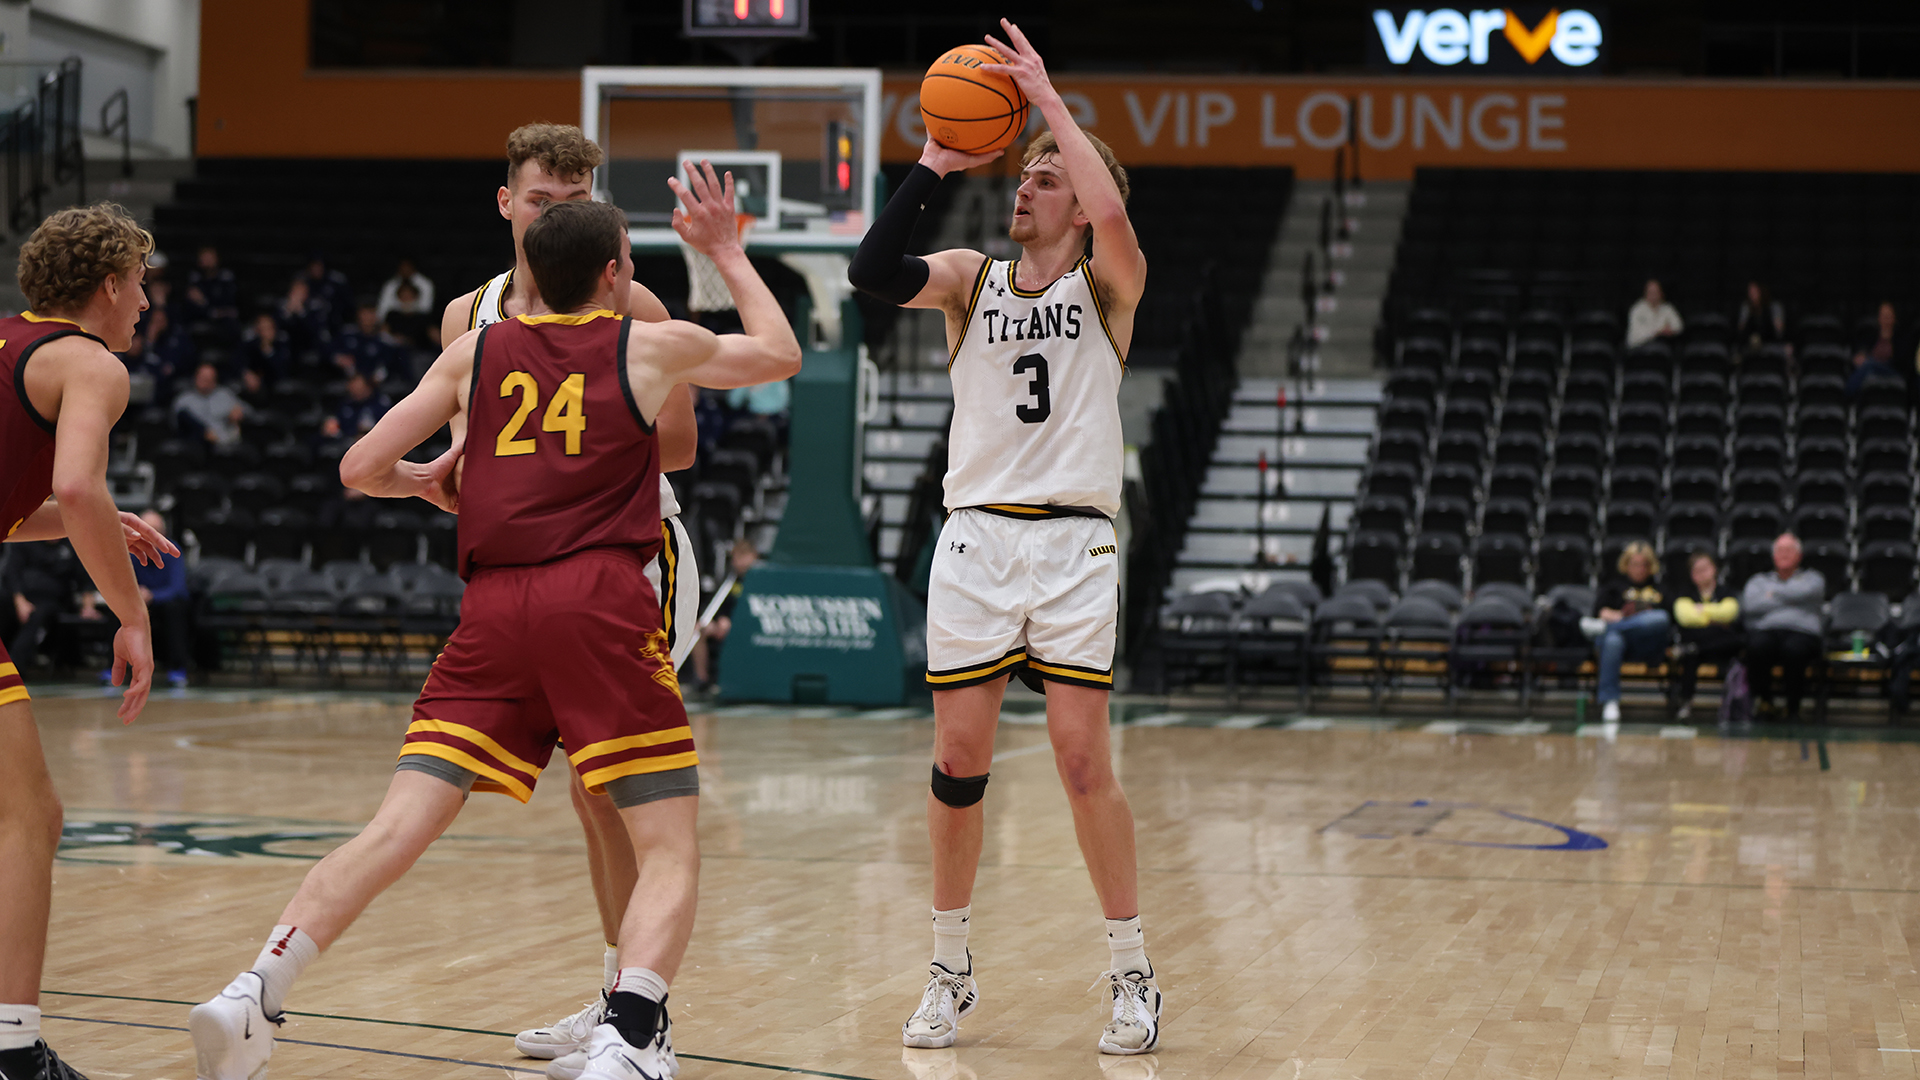 Eddie Muench scored a career high 30 points against the Knights by shooting 11 of 21 from the field and 6-for-8 at the free throw line.